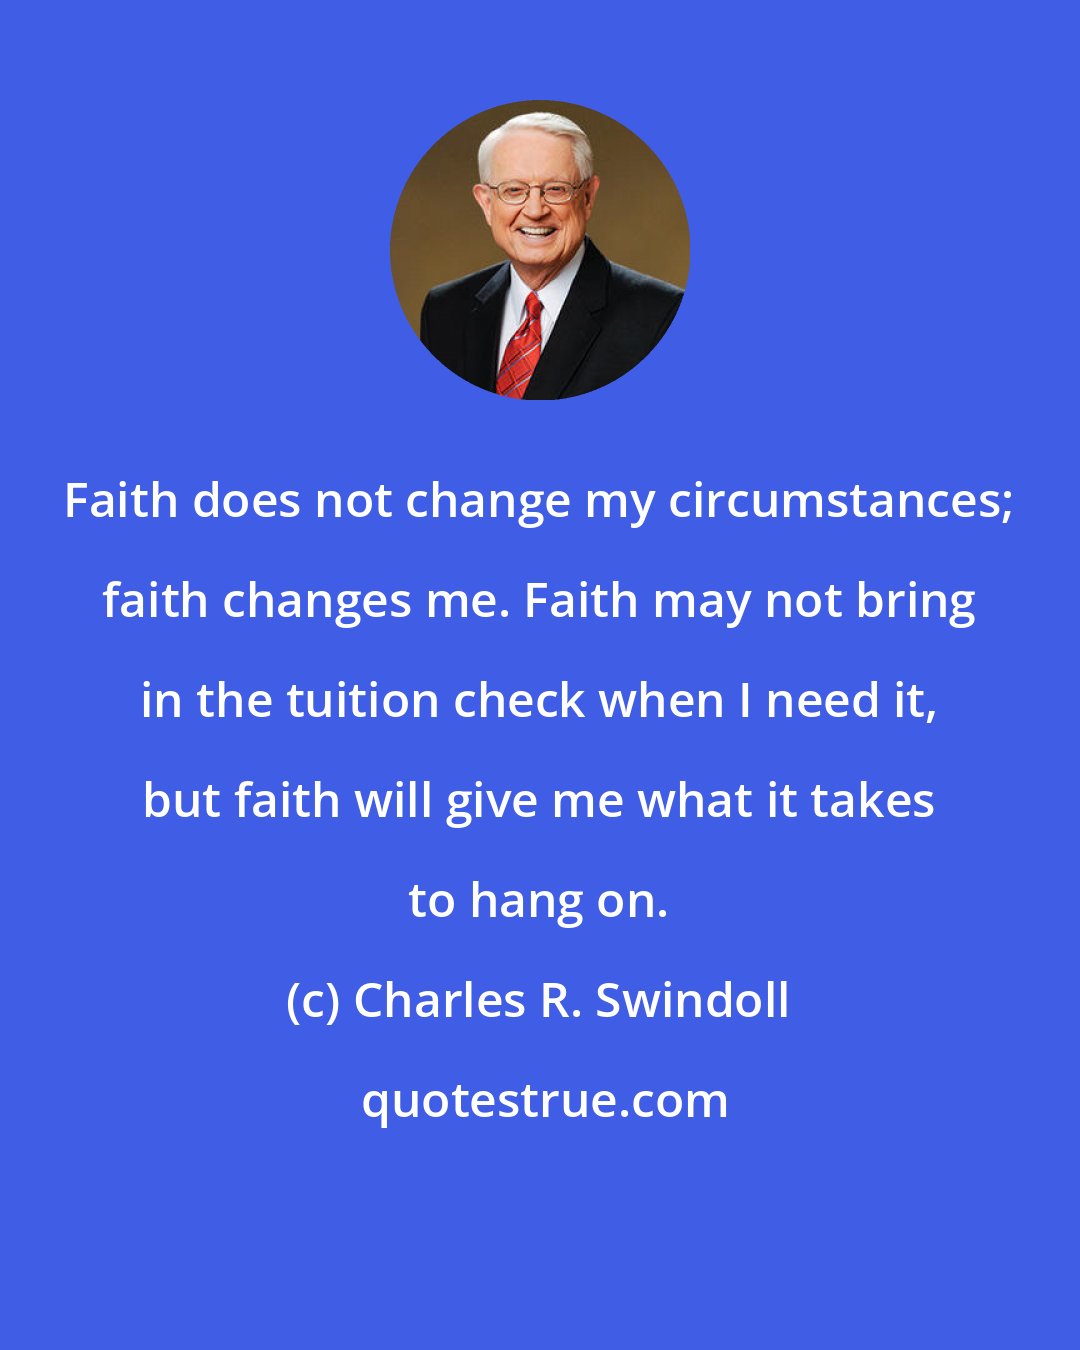 Charles R. Swindoll: Faith does not change my circumstances; faith changes me. Faith may not bring in the tuition check when I need it, but faith will give me what it takes to hang on.